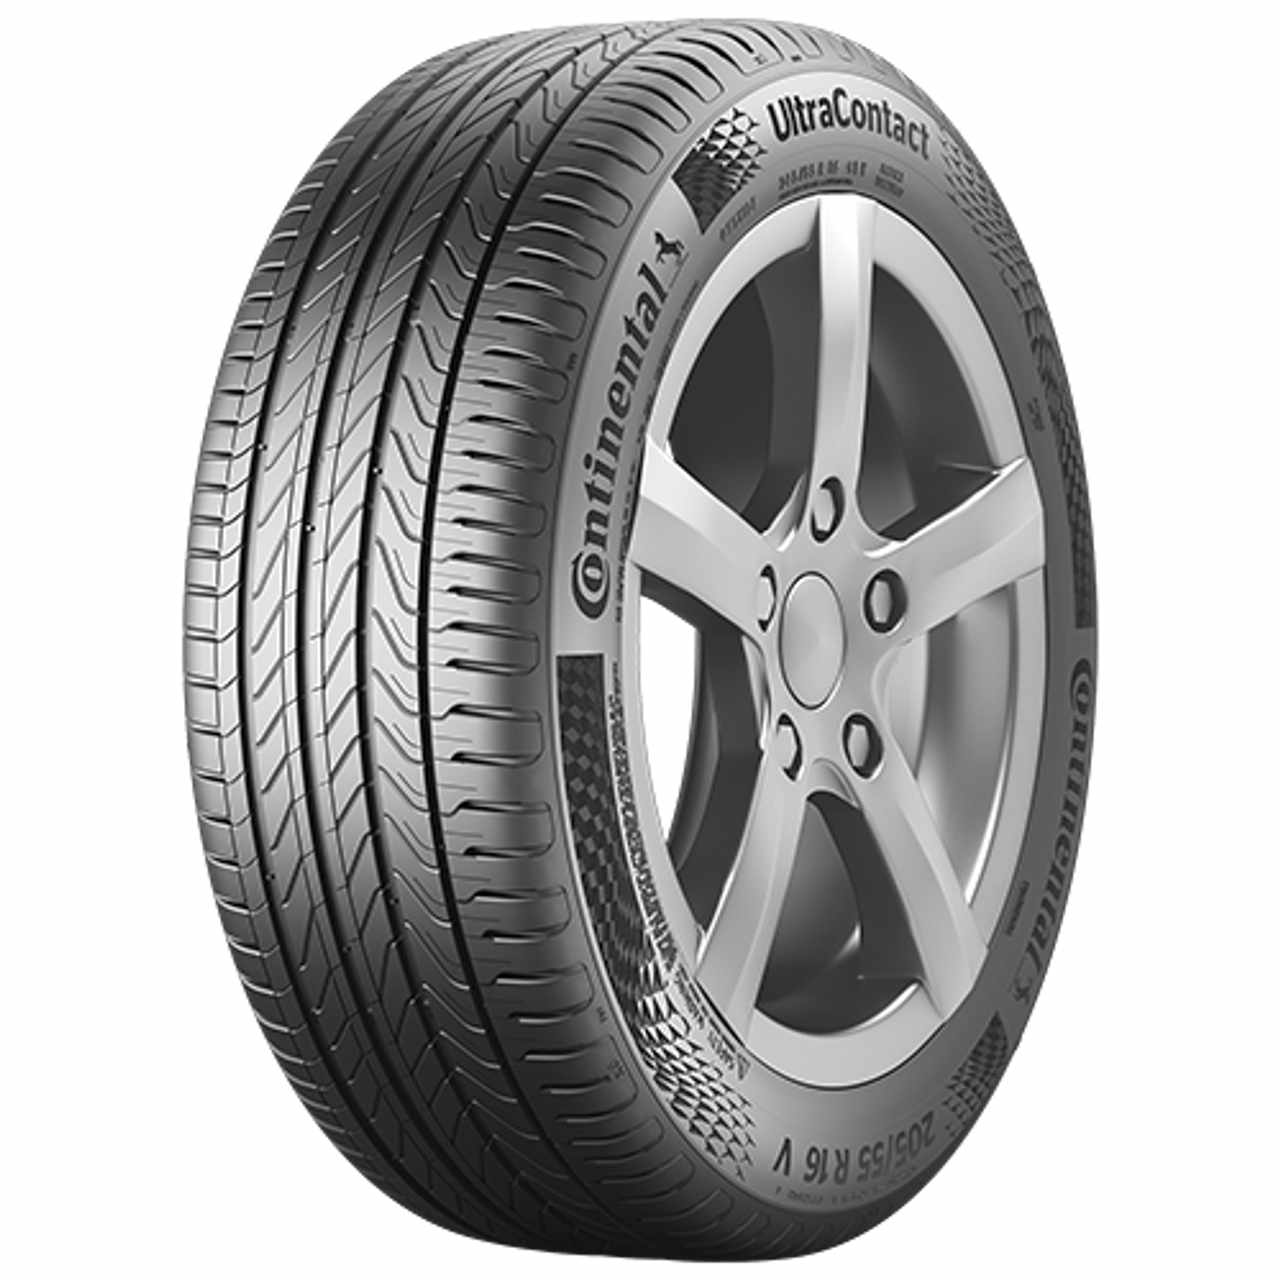 CONTINENTAL ULTRACONTACT (EVc) 225/45R17 91Y FR BSW